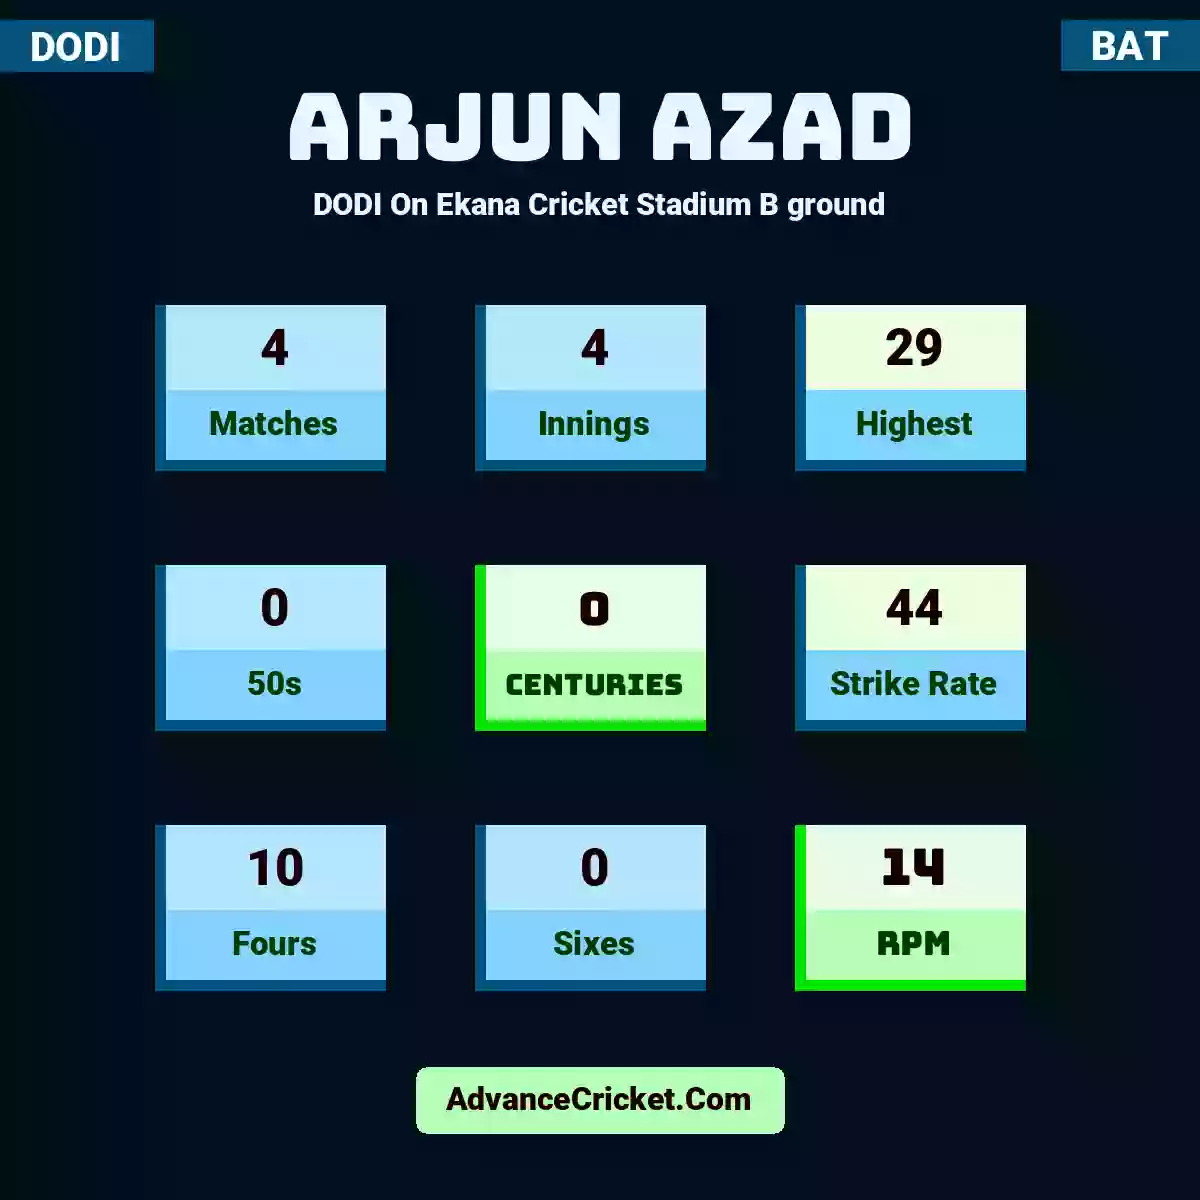 Arjun Azad DODI  On Ekana Cricket Stadium B ground, Arjun Azad played 4 matches, scored 29 runs as highest, 0 half-centuries, and 0 centuries, with a strike rate of 44. A.Azad hit 10 fours and 0 sixes, with an RPM of 14.